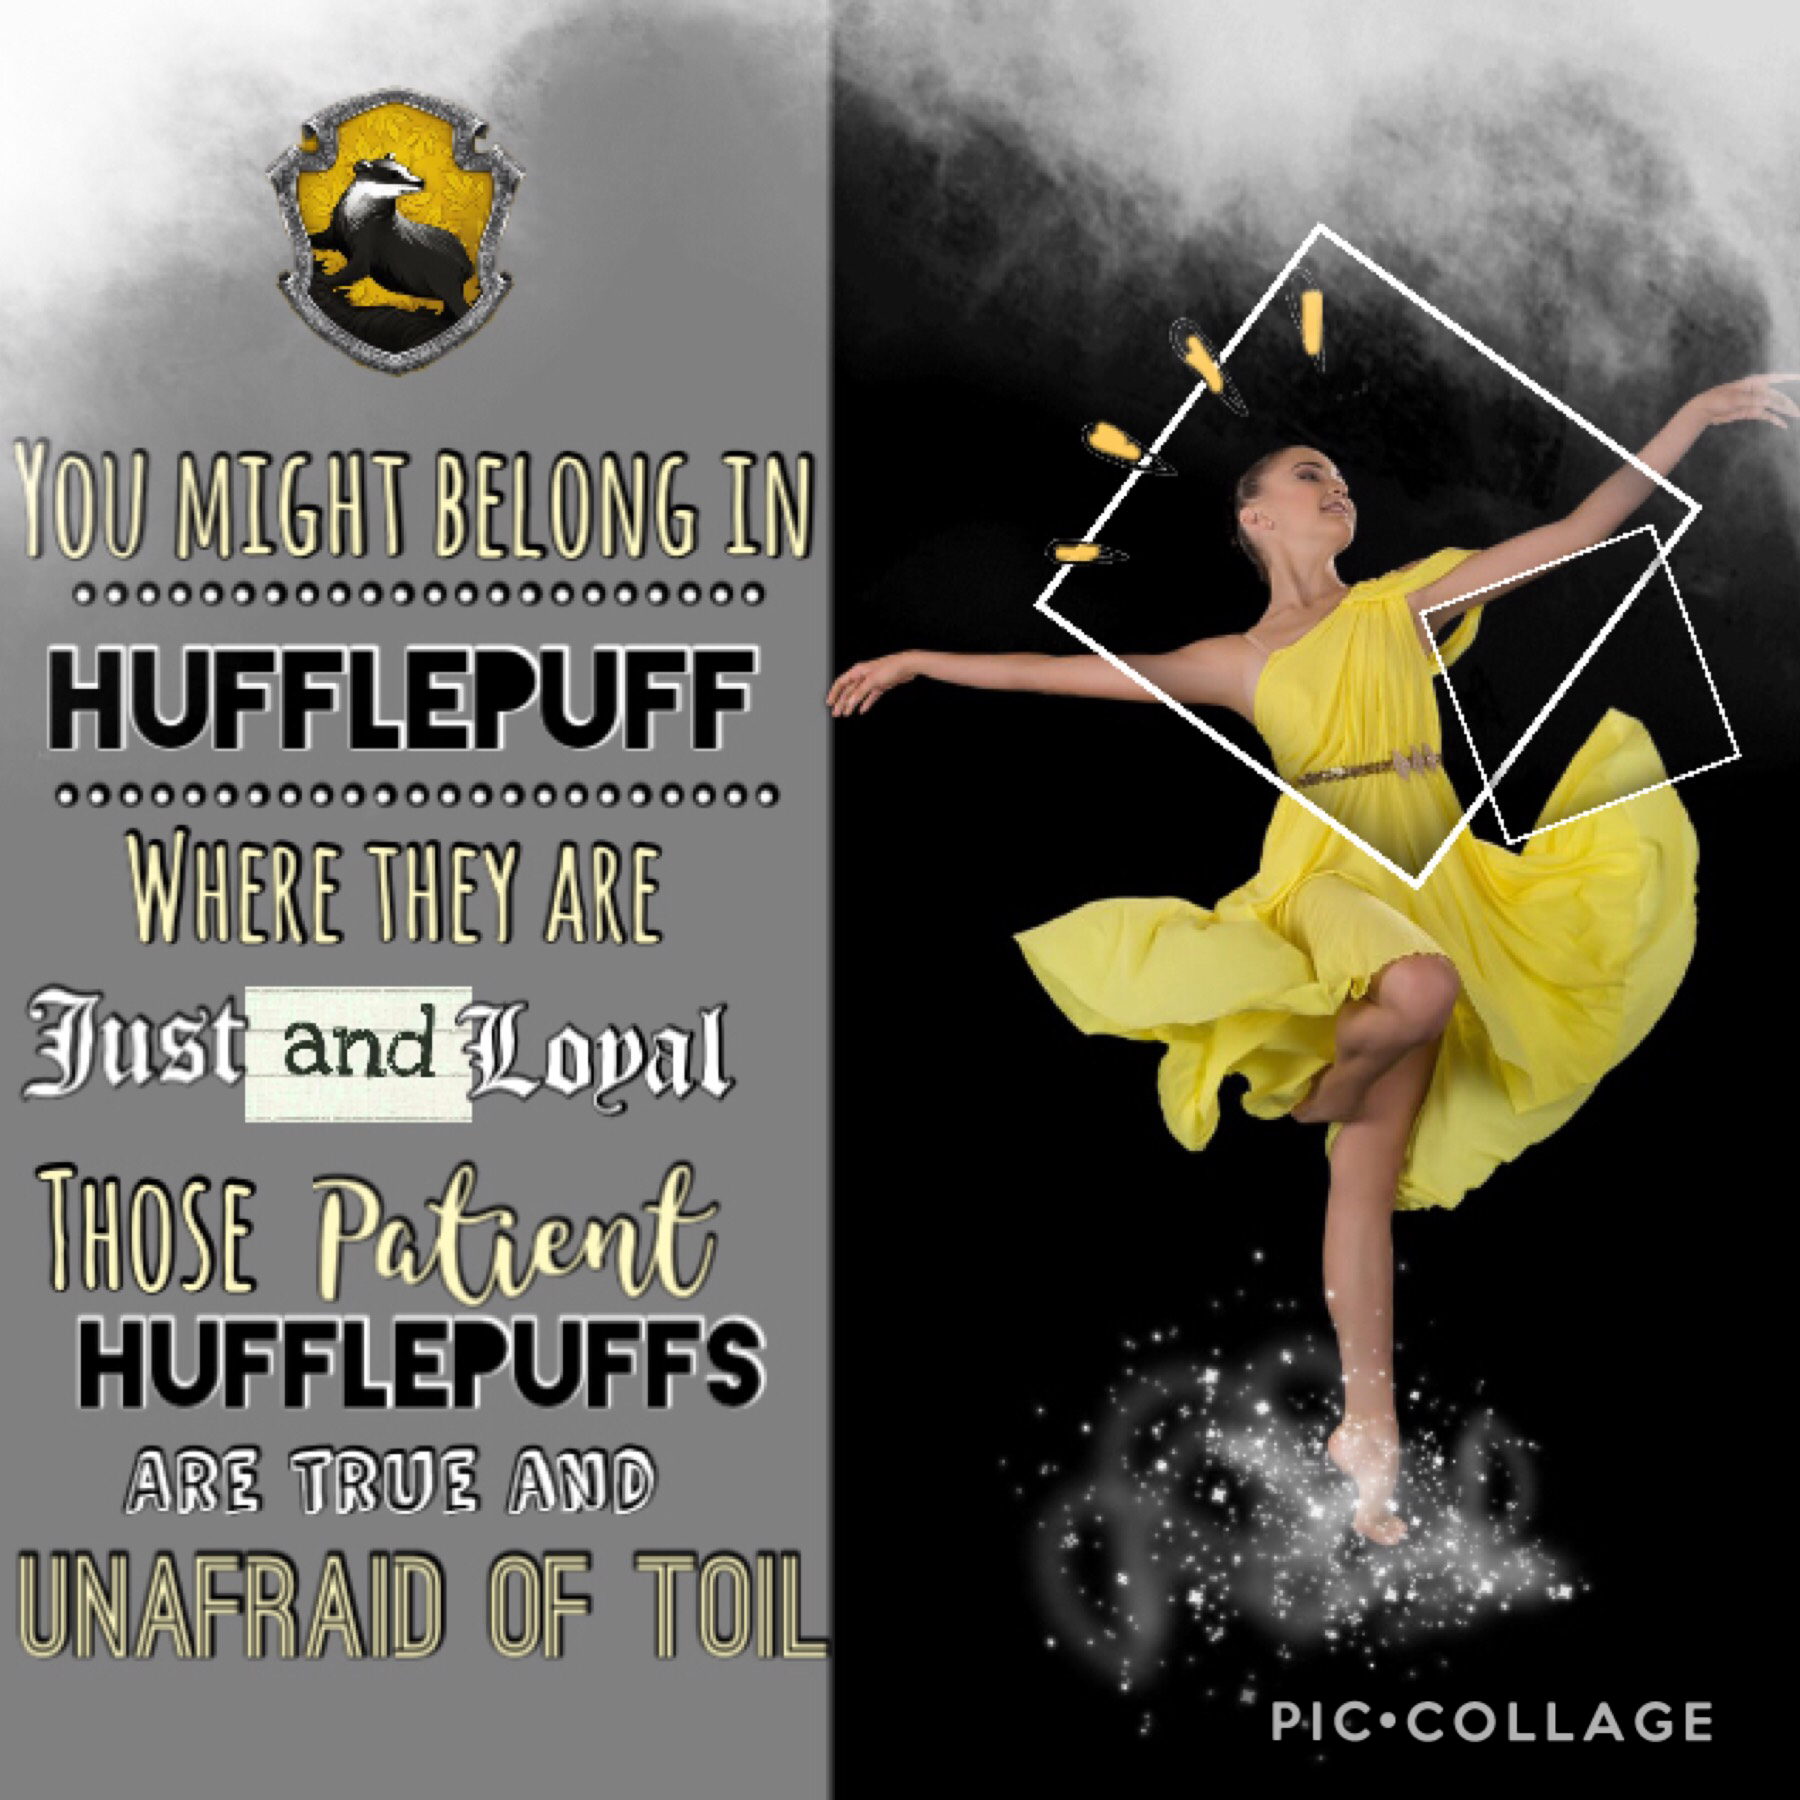 Entry into _whitedaisies_ games! ❤️ comment if u are in hufflepuff. I am! 